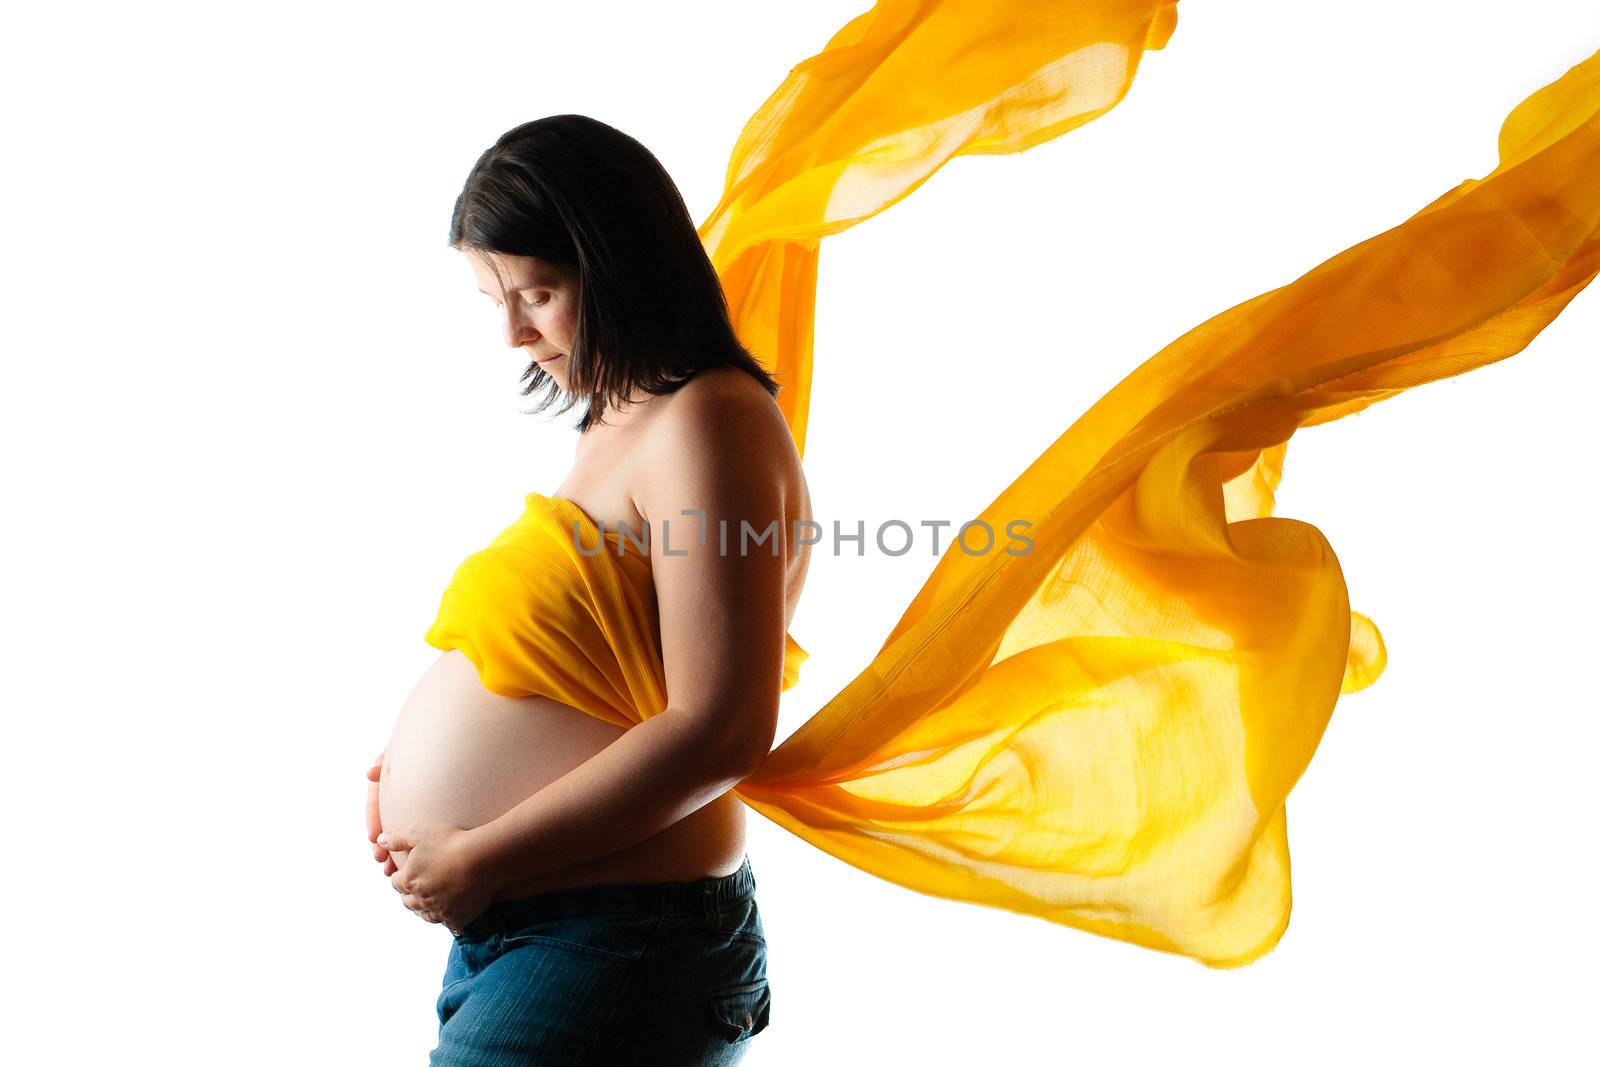 Pregnant woman in studio by Talanis